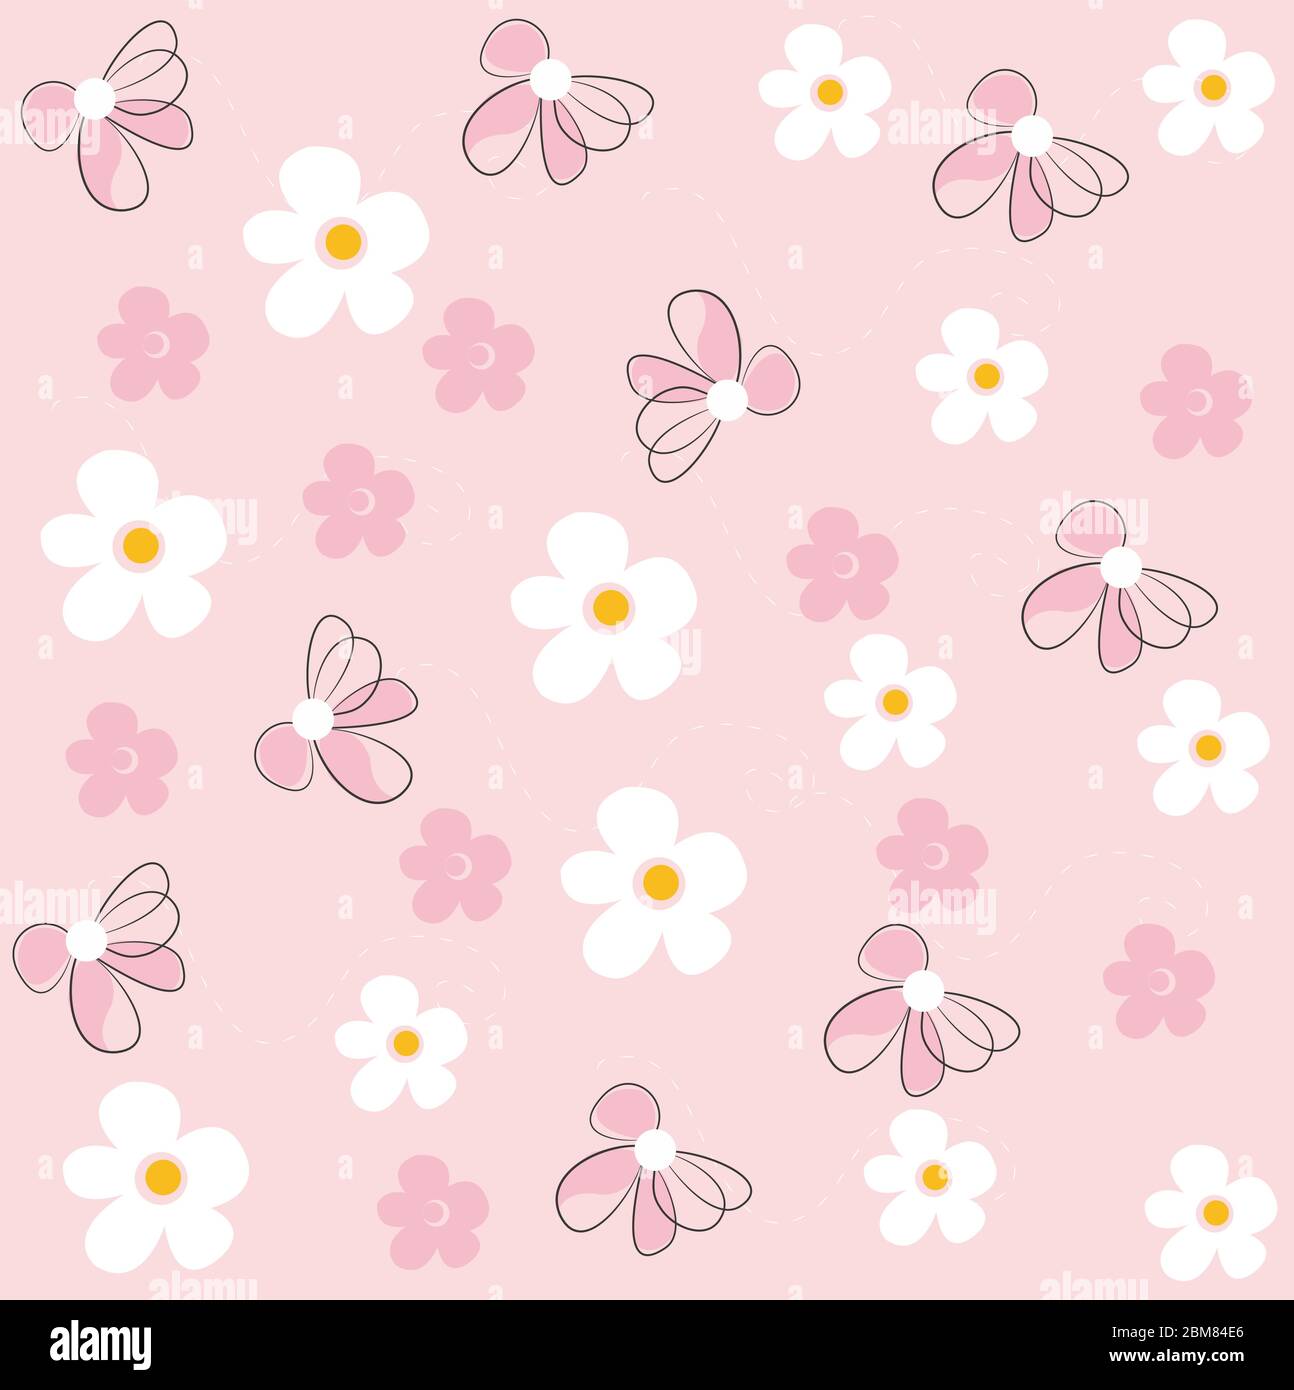 Pink Daisy Images  Free Download on Freepik